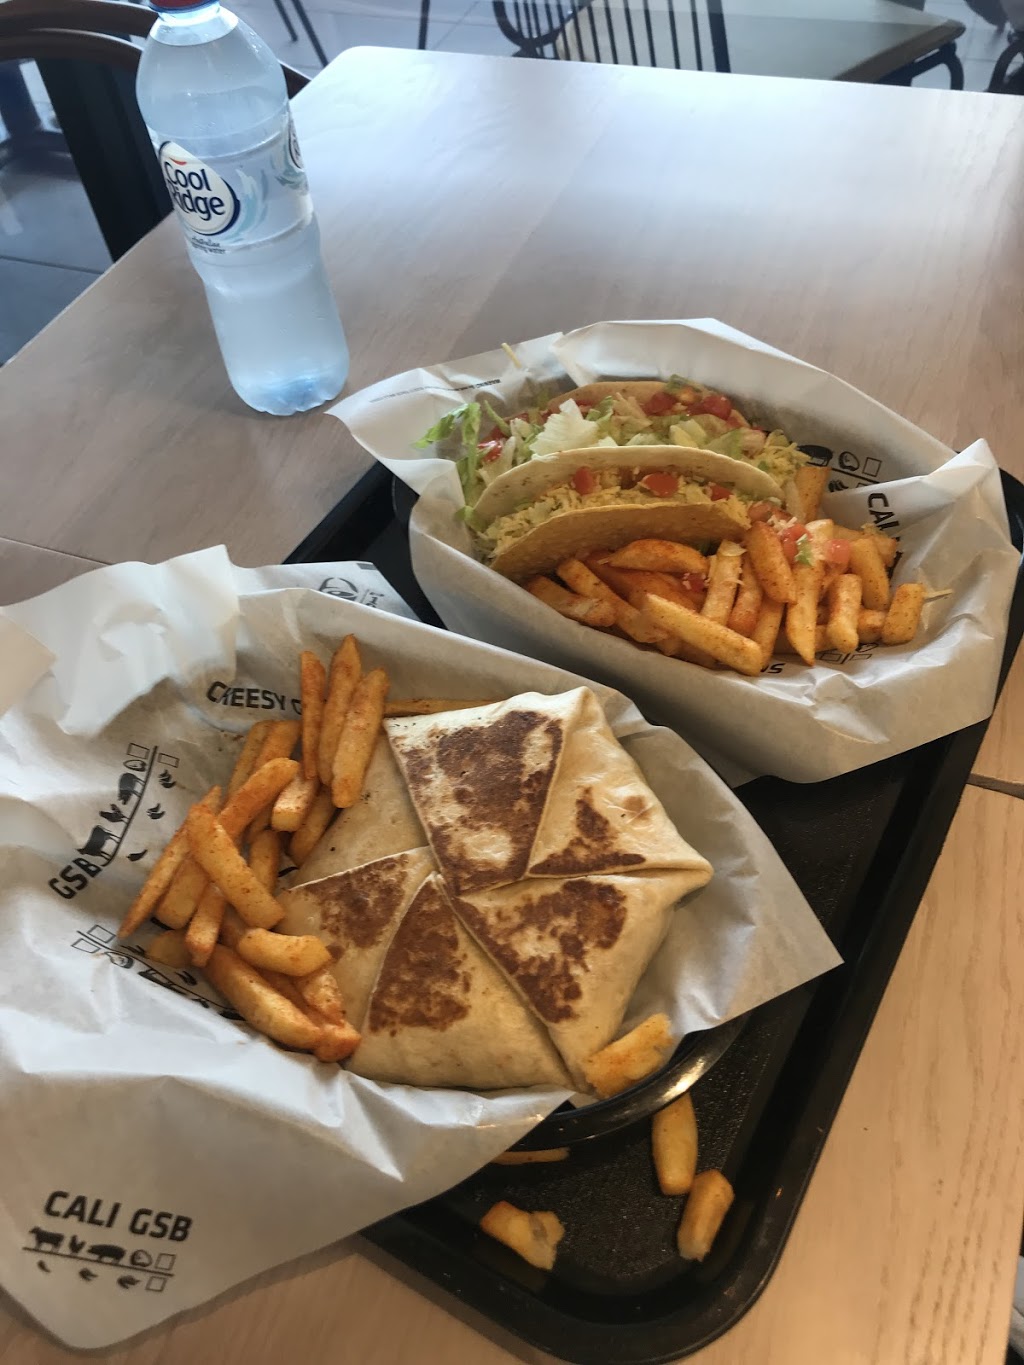 Taco Bell Cleveland | restaurant | 1 Grant St, Cleveland QLD 4163, Australia | 0738216078 OR +61 7 3821 6078